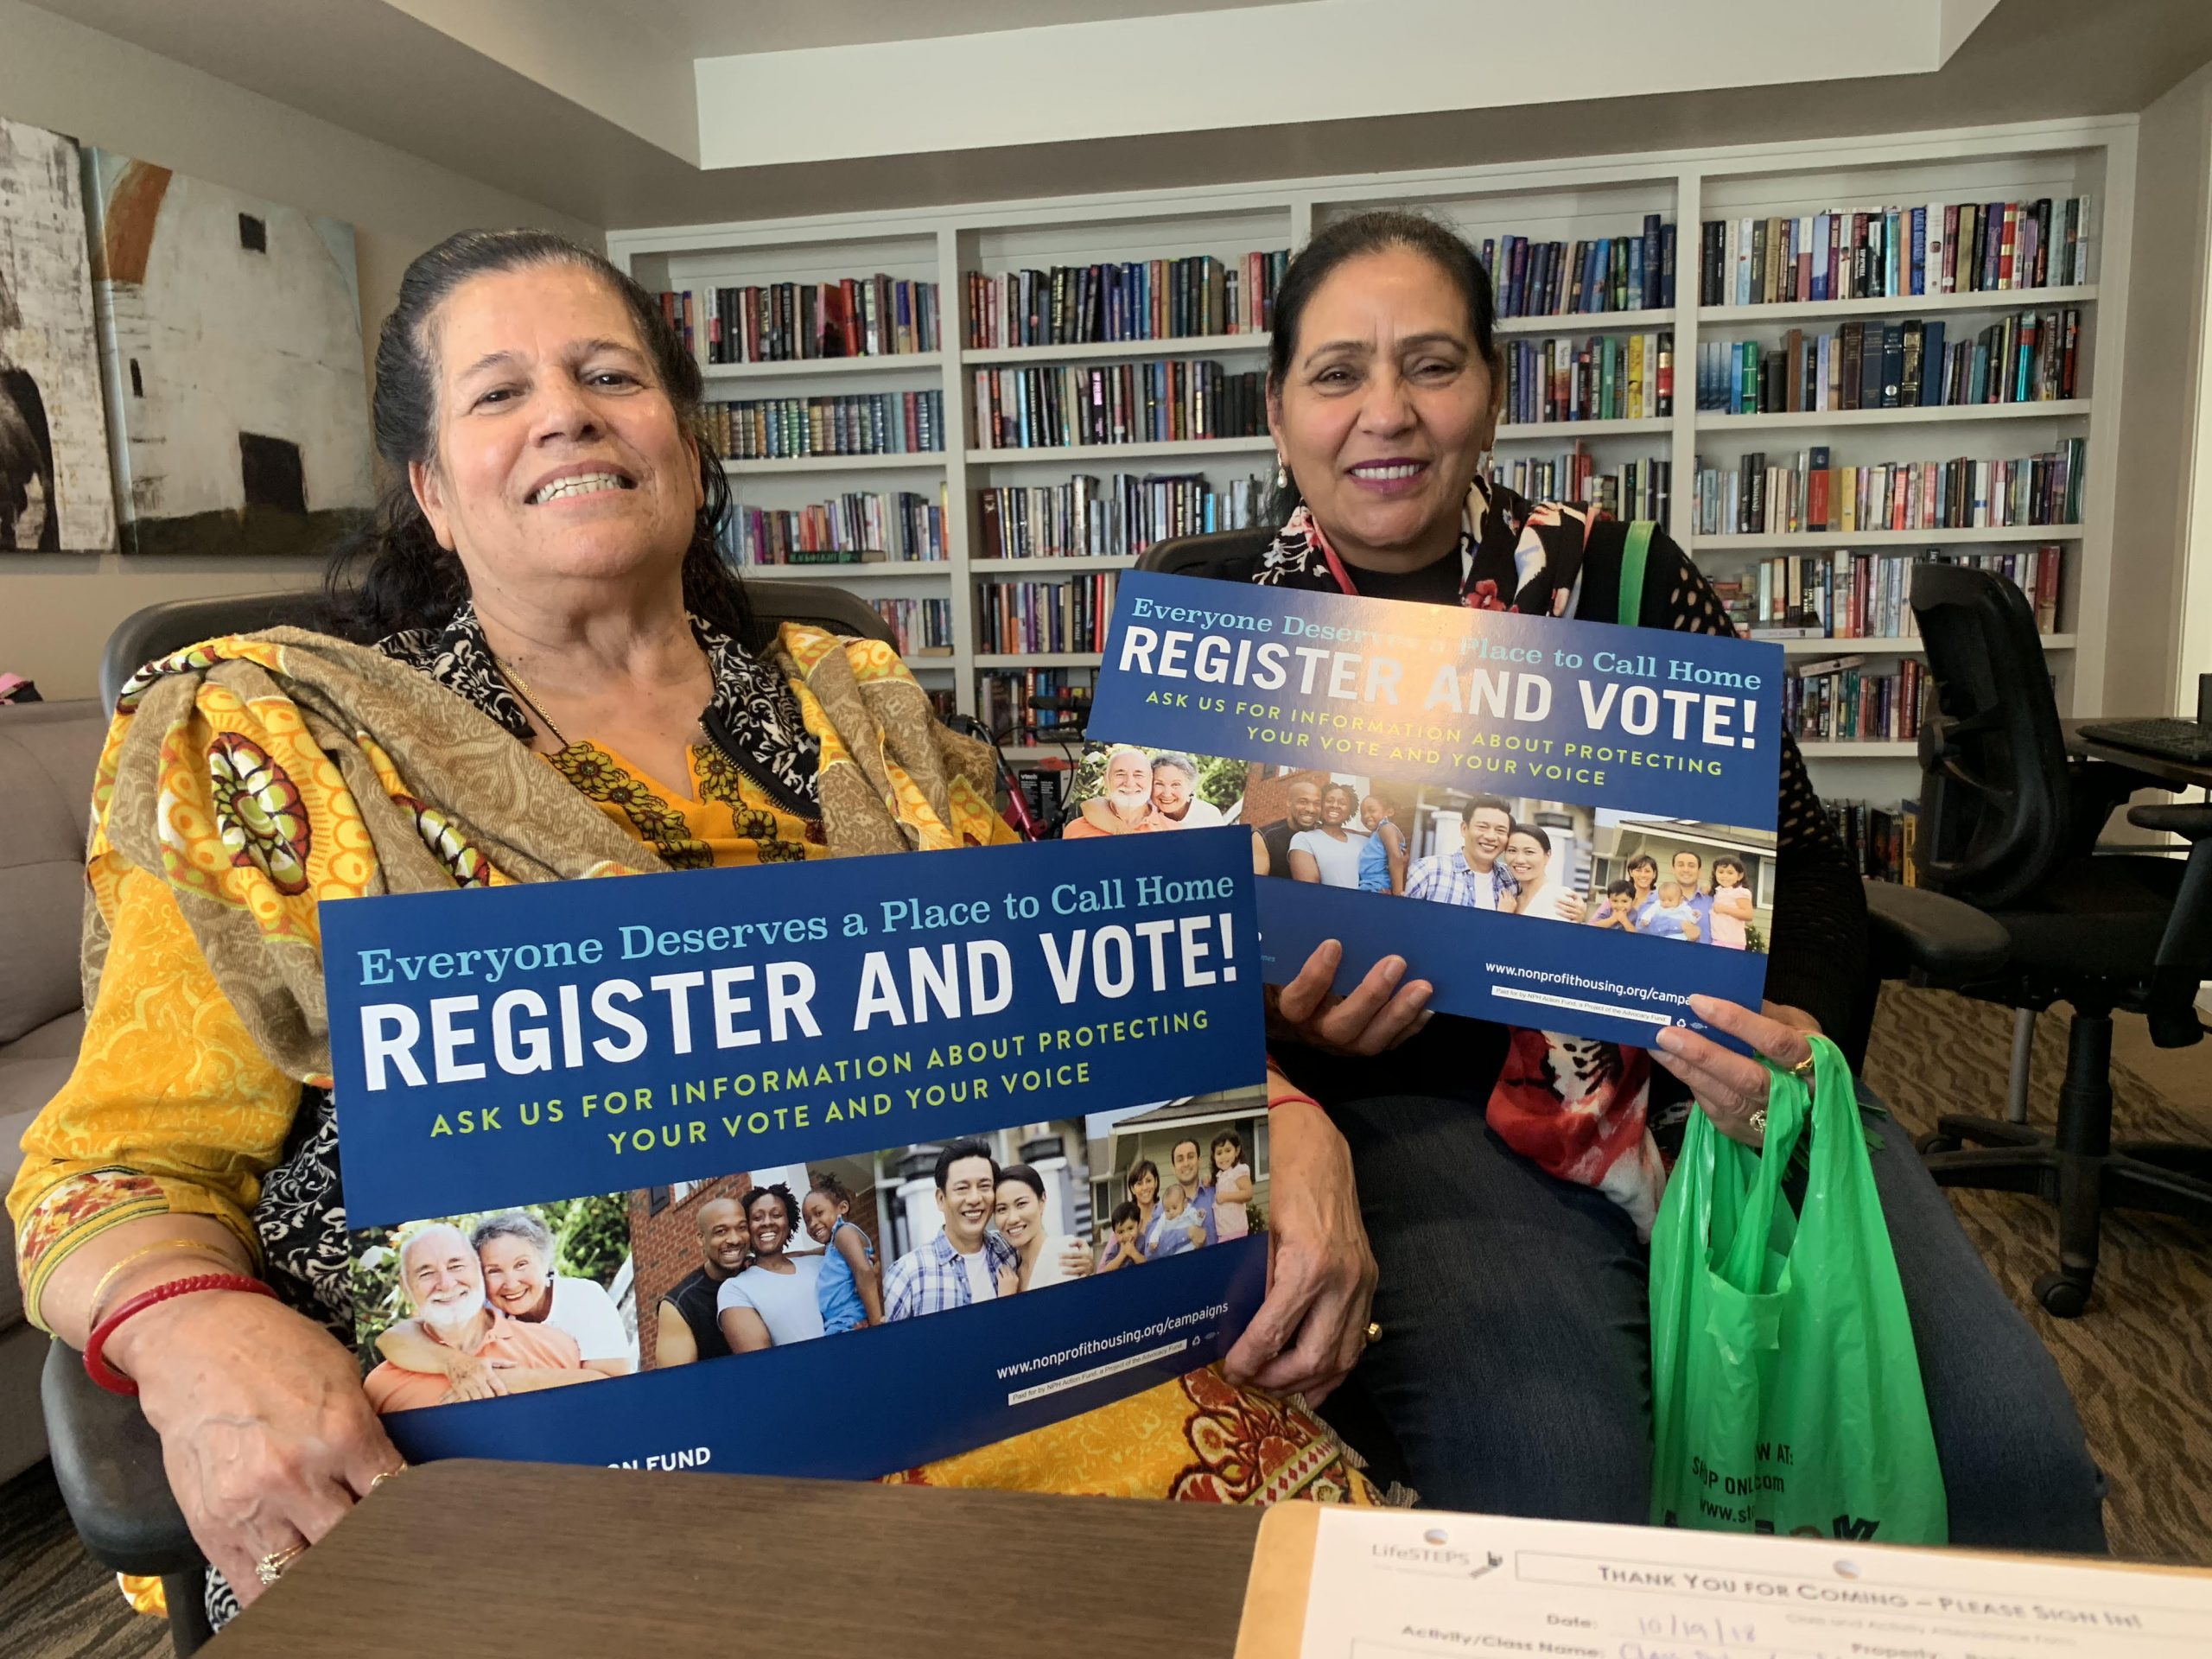 Residents holding "register and vote" signs